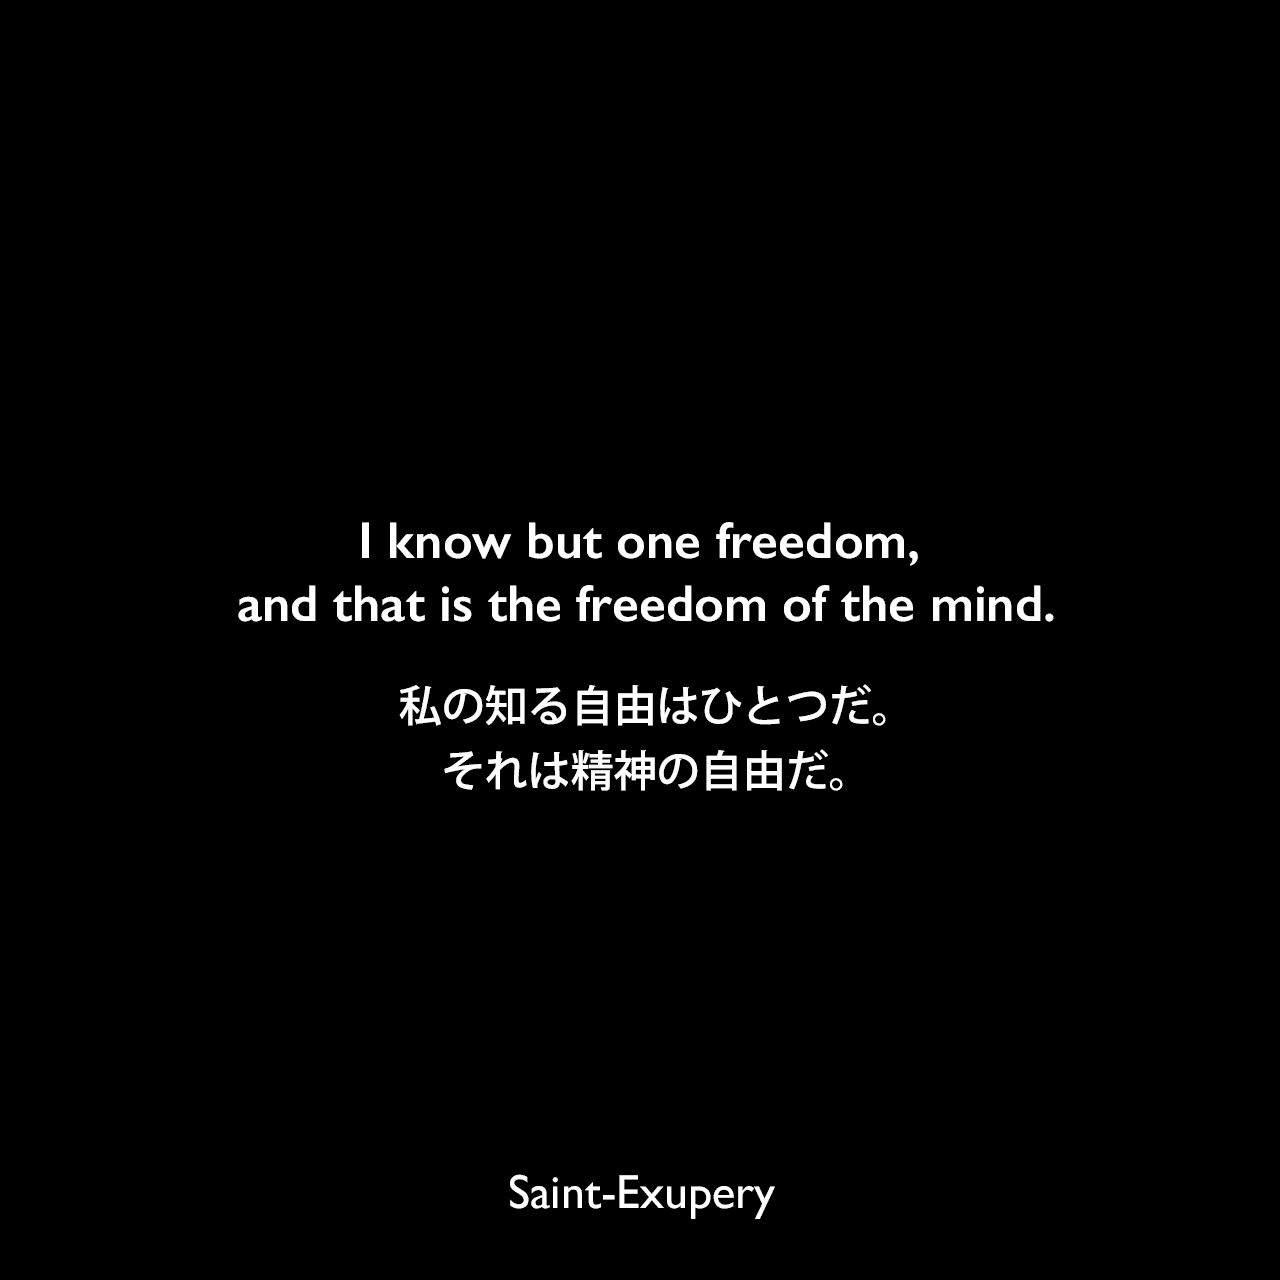 I know but one freedom, and that is the freedom of the mind.私の知る自由はひとつだ。それは精神の自由だ。Saint-Exupery